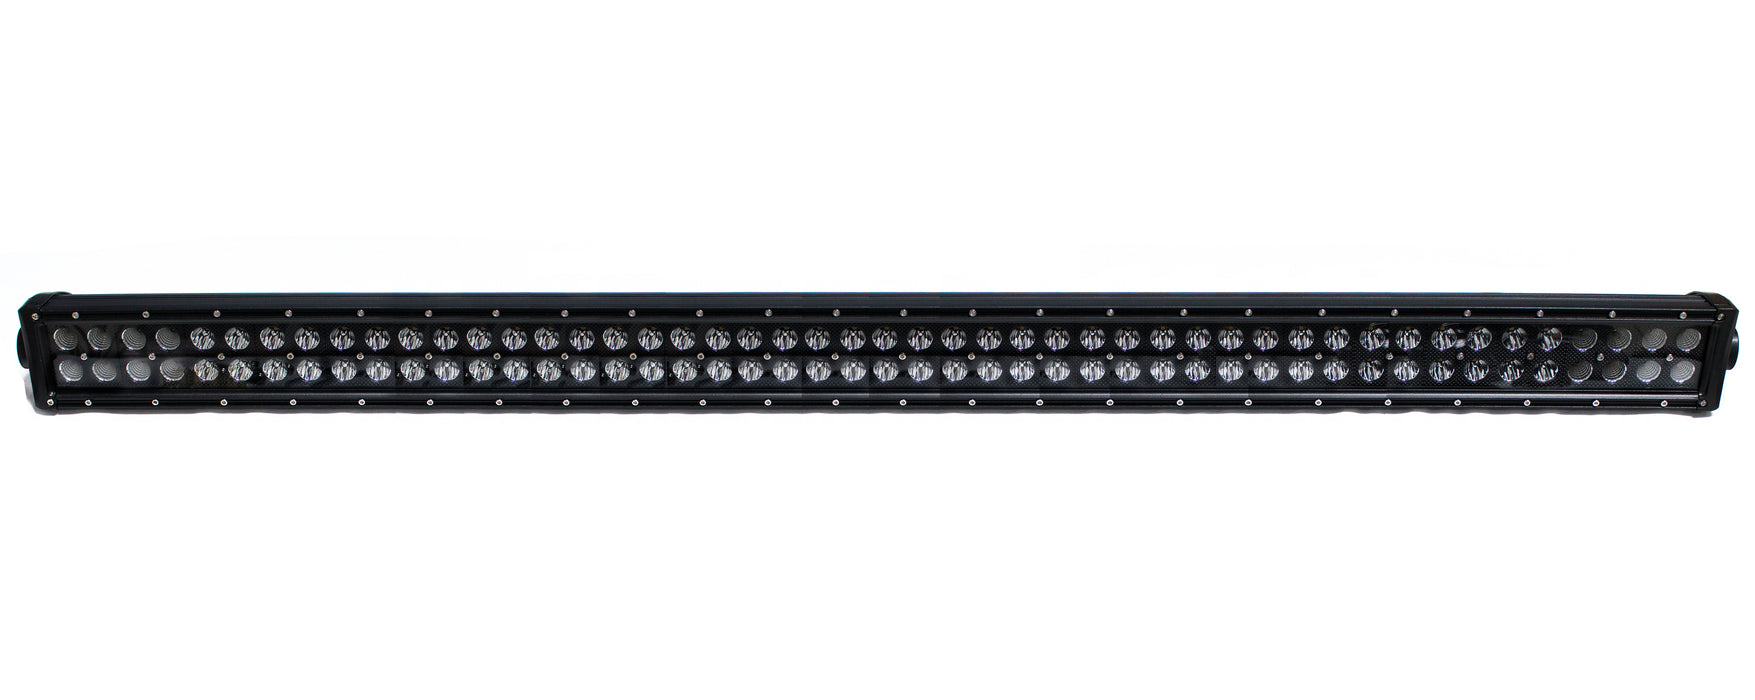 BLACKED OUT® Series 50in Straight, Double Row, Silver Combo-Flood/Beam Straight Hi Performance Light Bar 288w